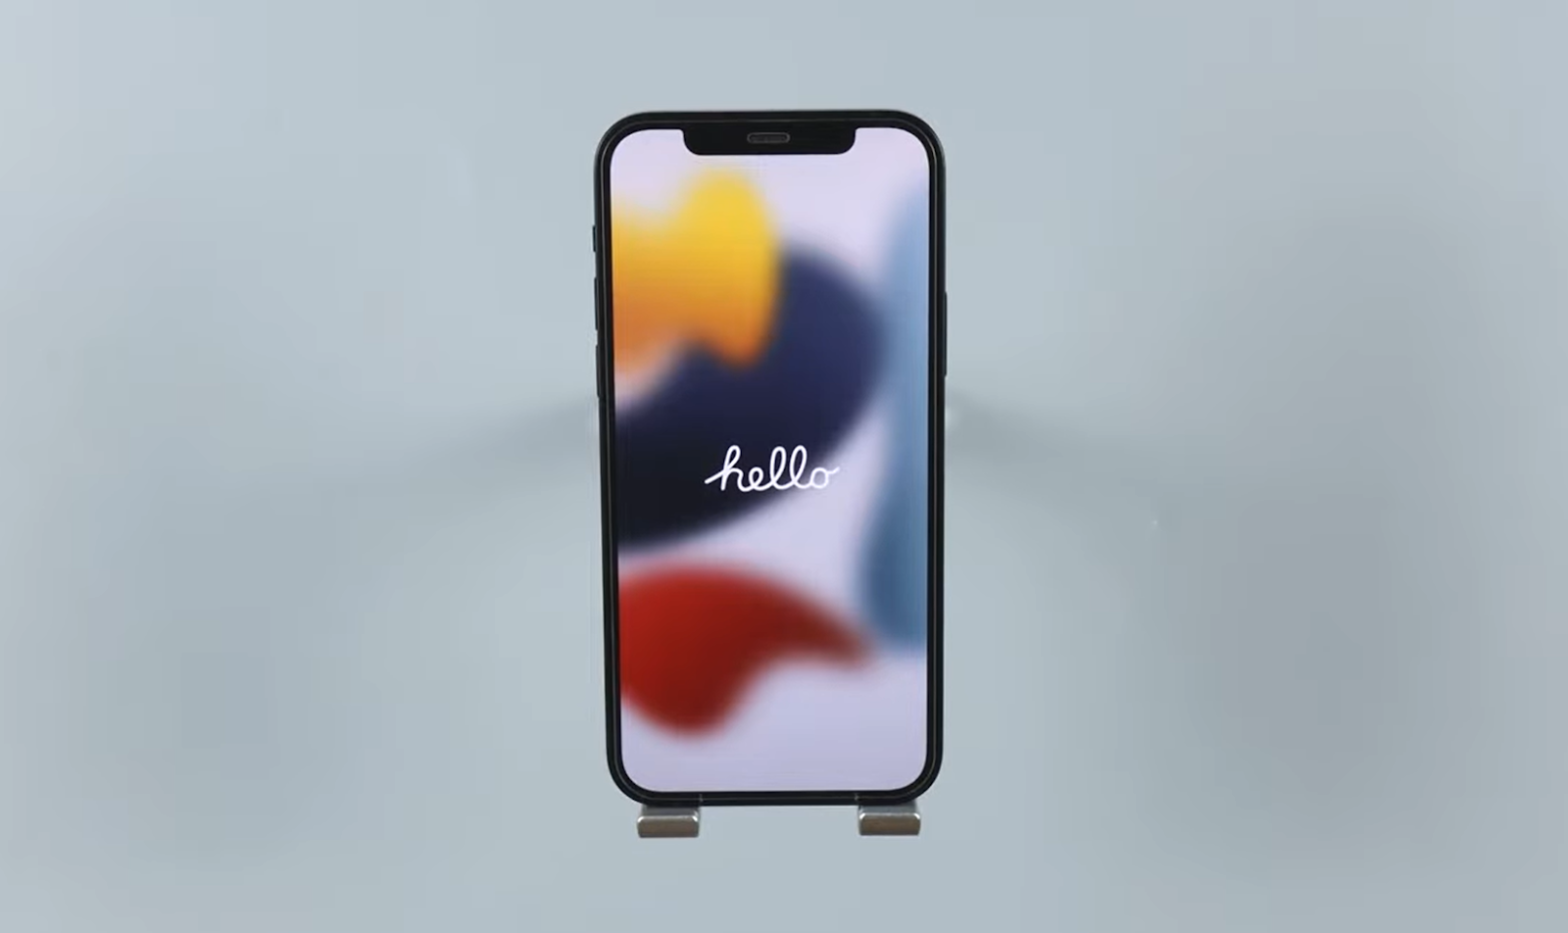 iPhone displaying colorful blurred background with a crisp 'hello' text